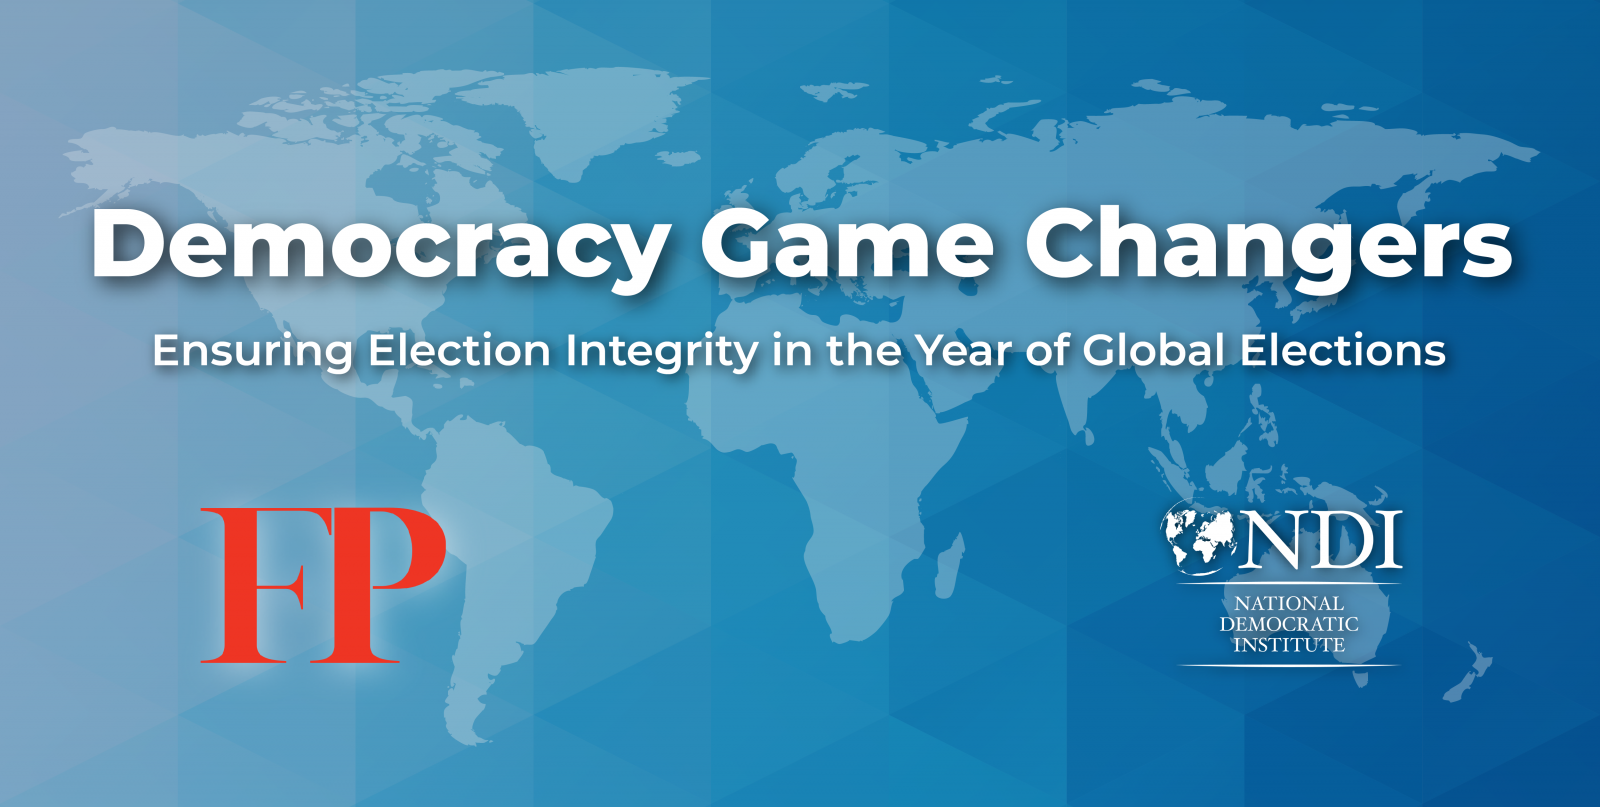 Ensuring Election Integrity in the Year of Global Elections